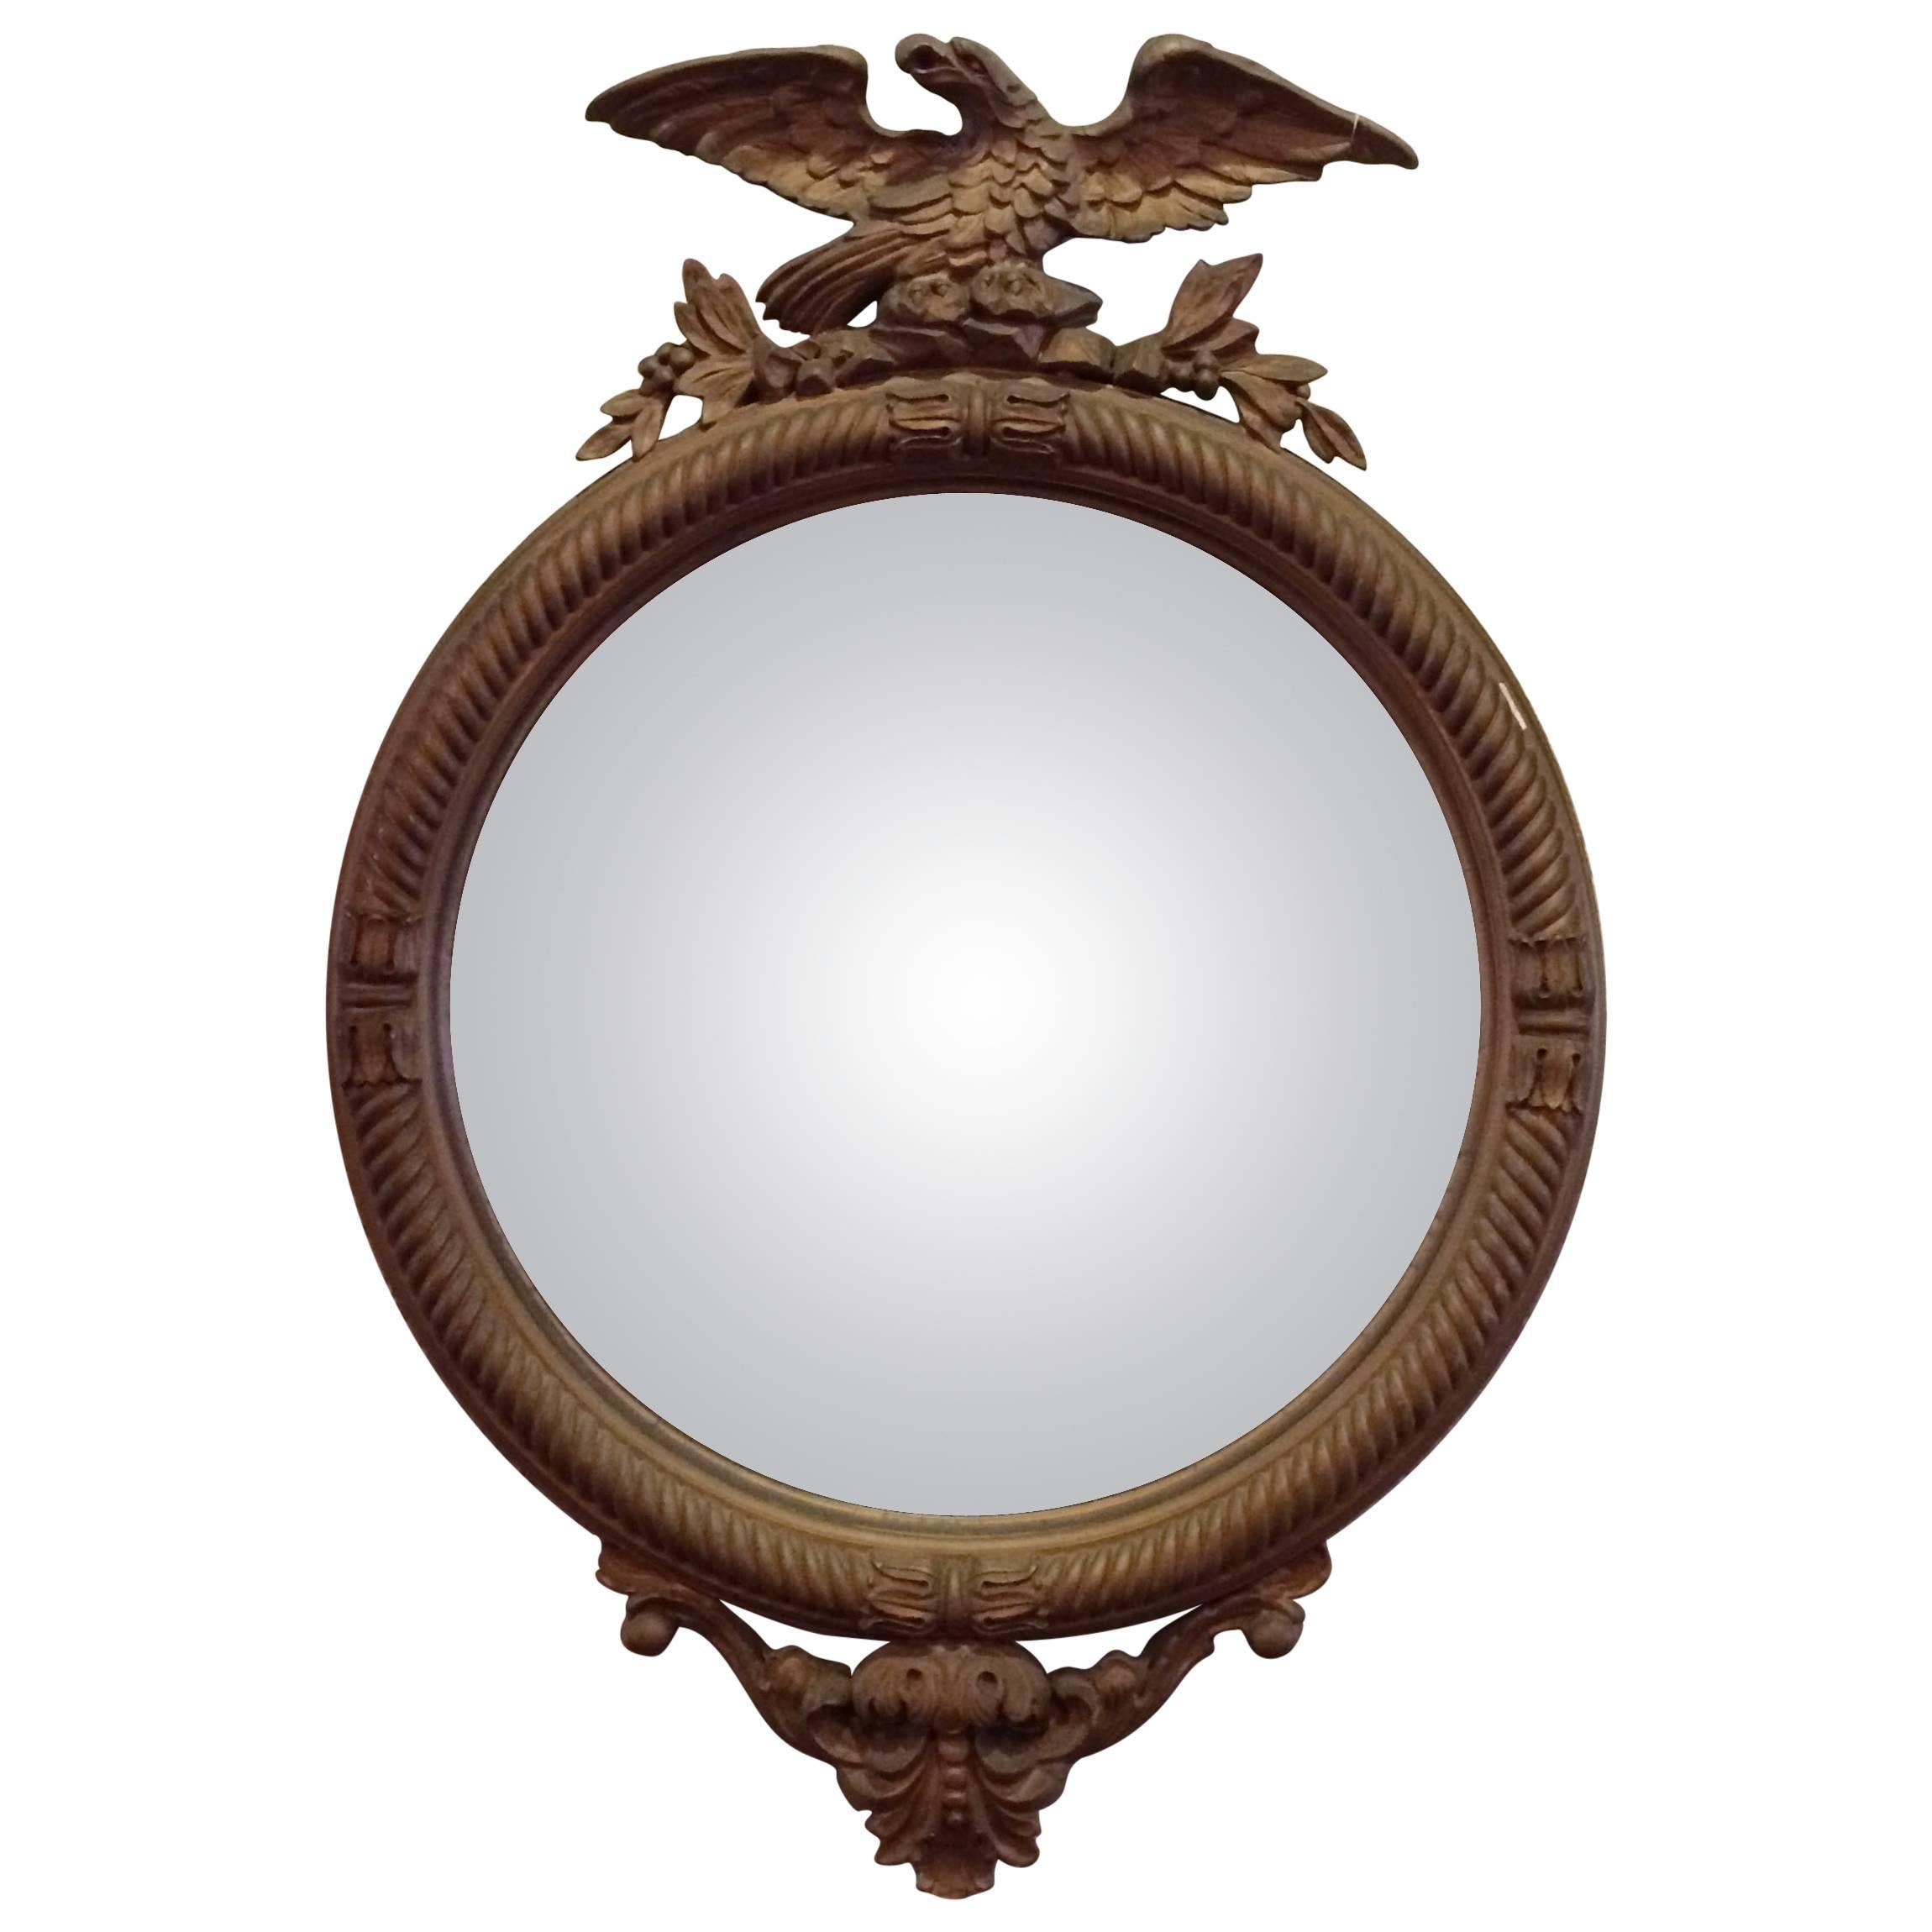 1930s Giltwood and Gesso Federal Style Convex Mirror